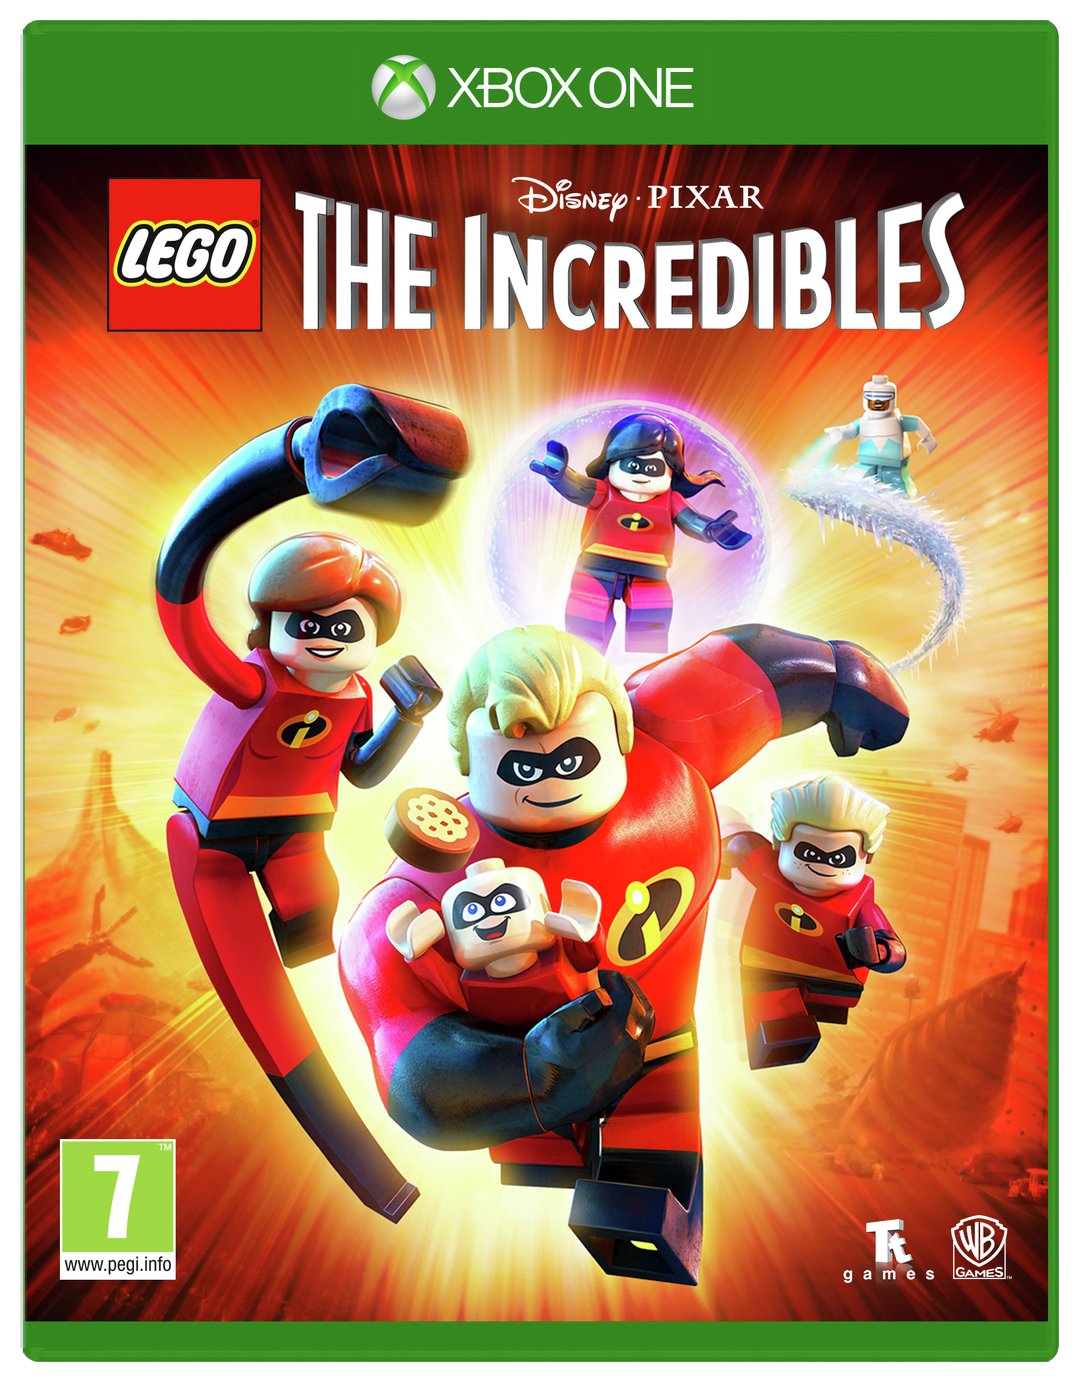 LEGO The Incredibles Xbox One Game Reviews